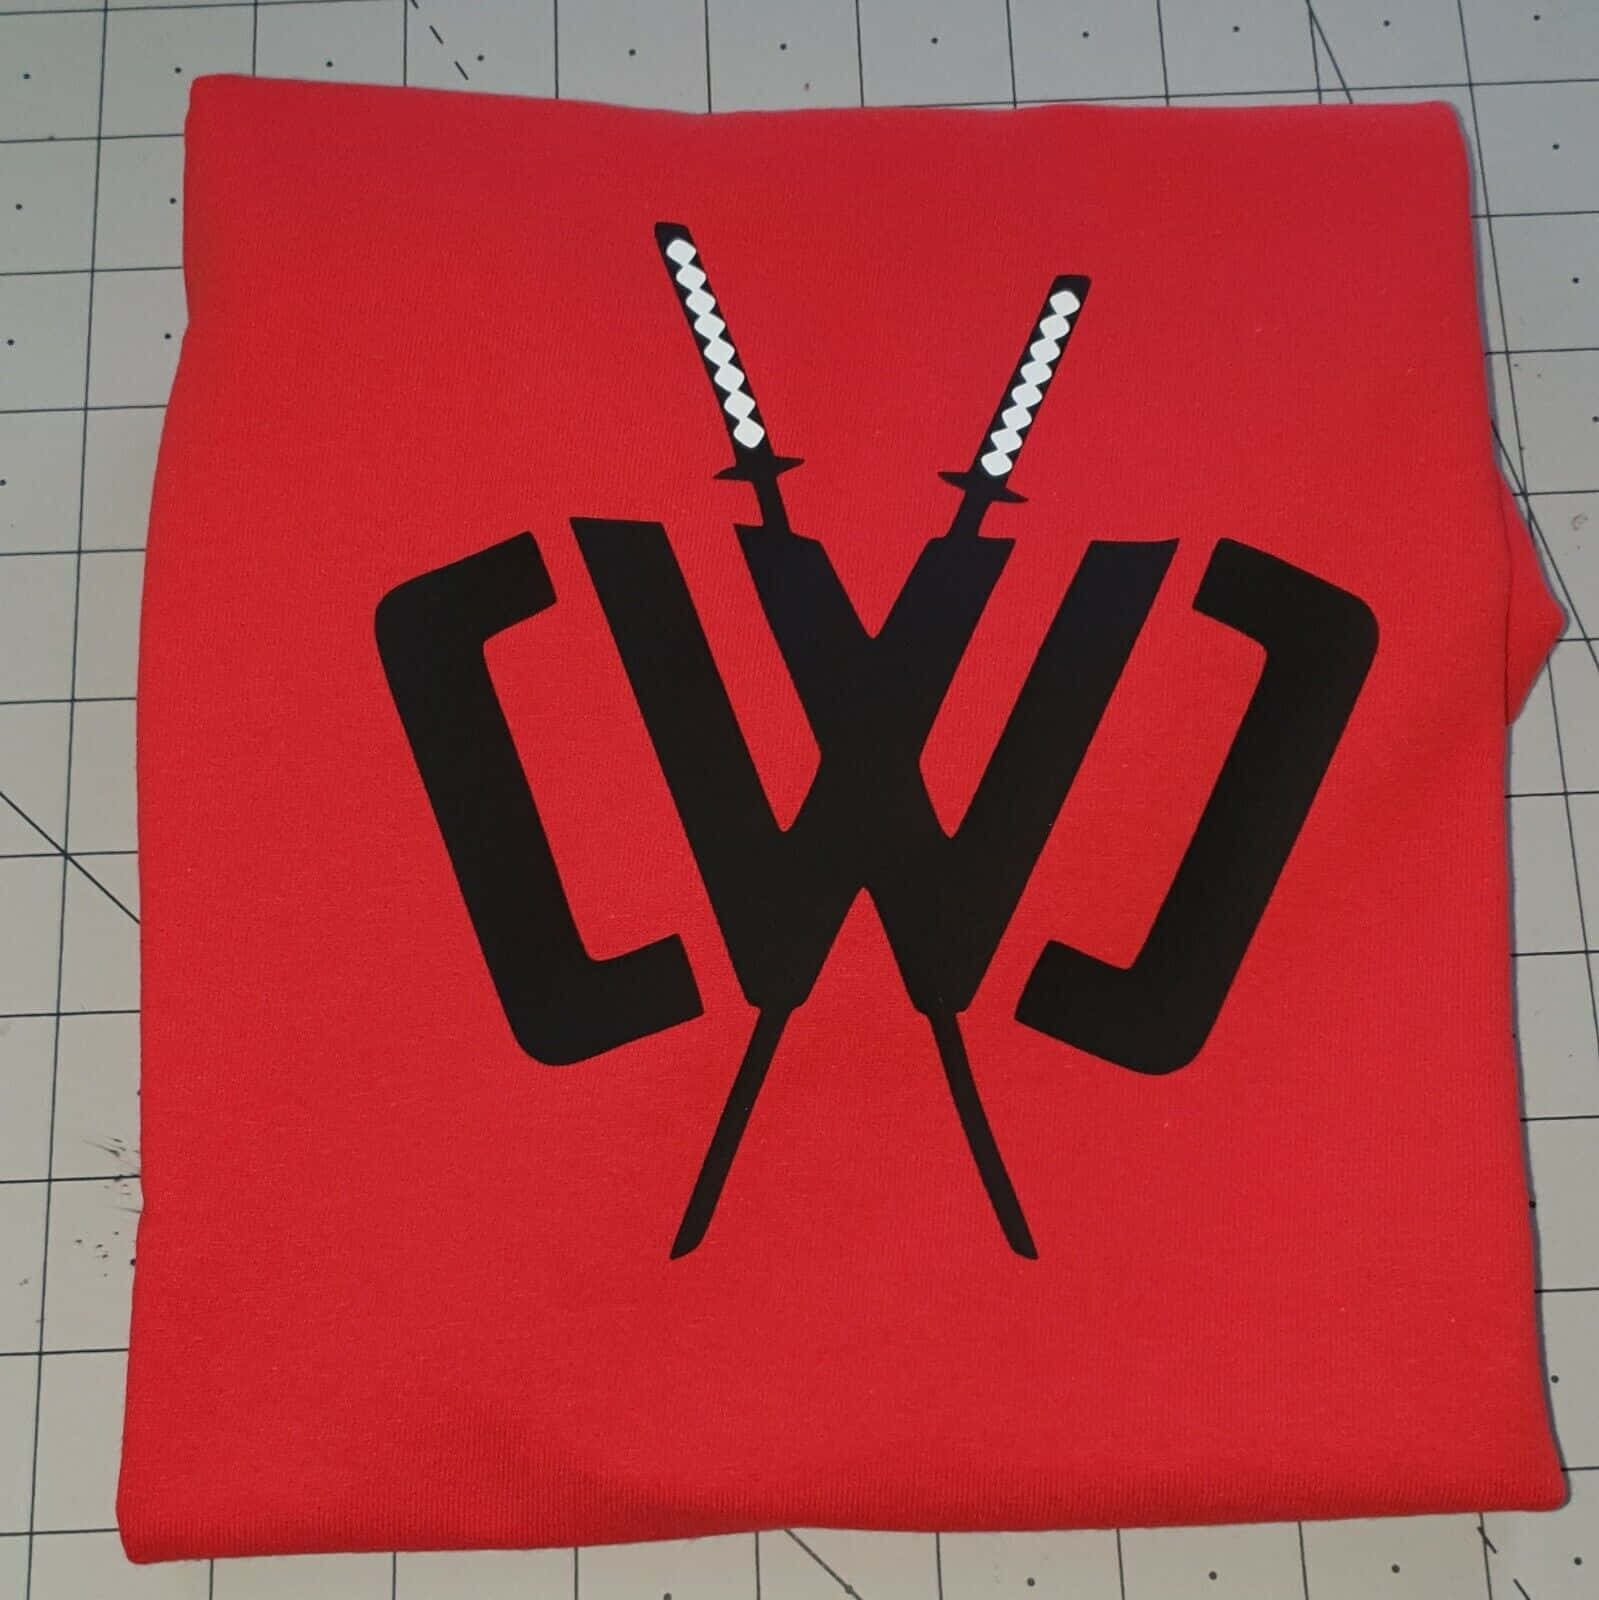 A Red Sweatshirt With Two Swords On It Background